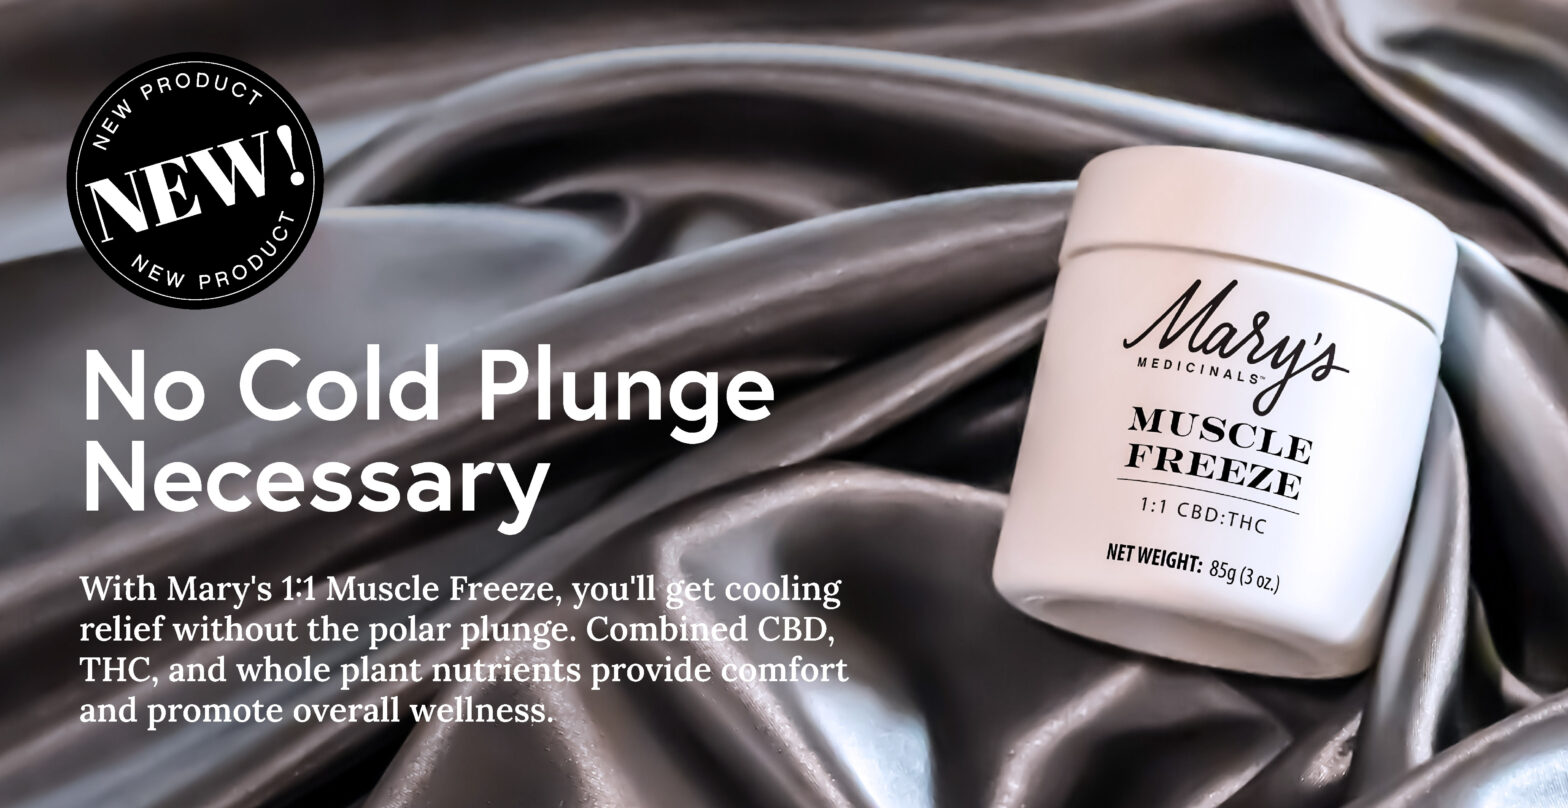 "No Cold Plunge Necessary: With Mary's 1:1 Muscle Freeze,you'll get cooling relief without the polar plunge. Combined CBD, THC, and whole plant nutrients provide comfort and promote overall wellness." Muscle Freeze Jar on silver silk sheet with New Product button